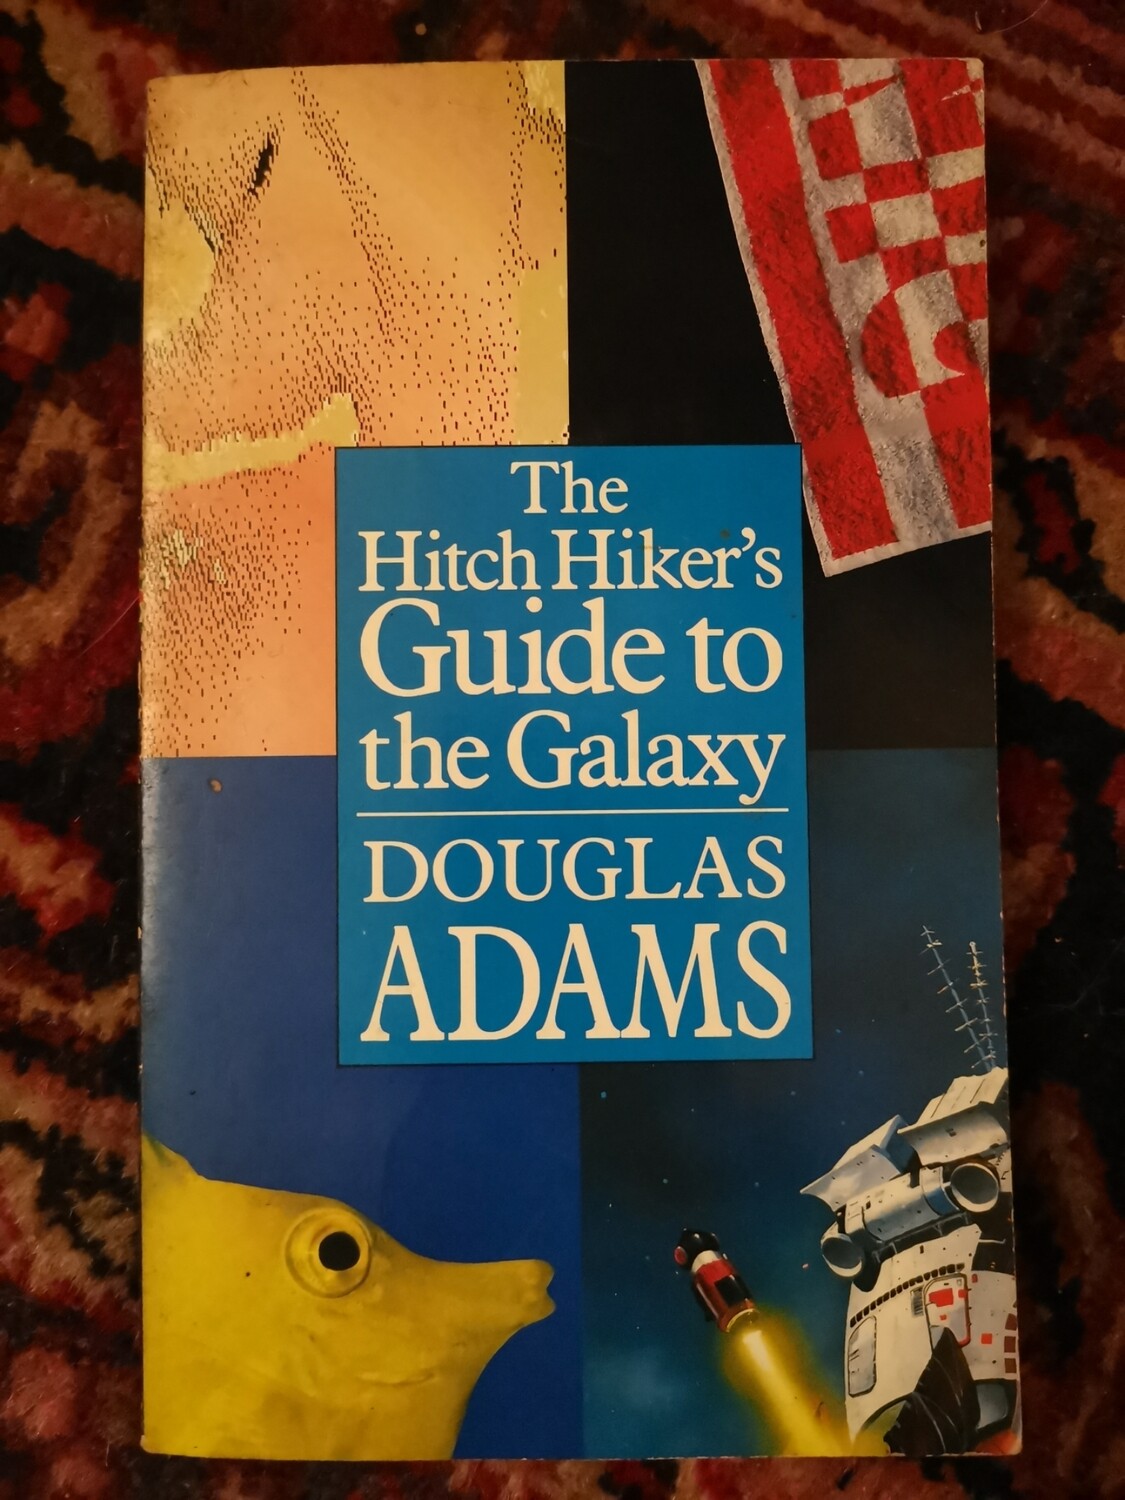 The hitch hikers guide to the galaxy, Douglas Adams